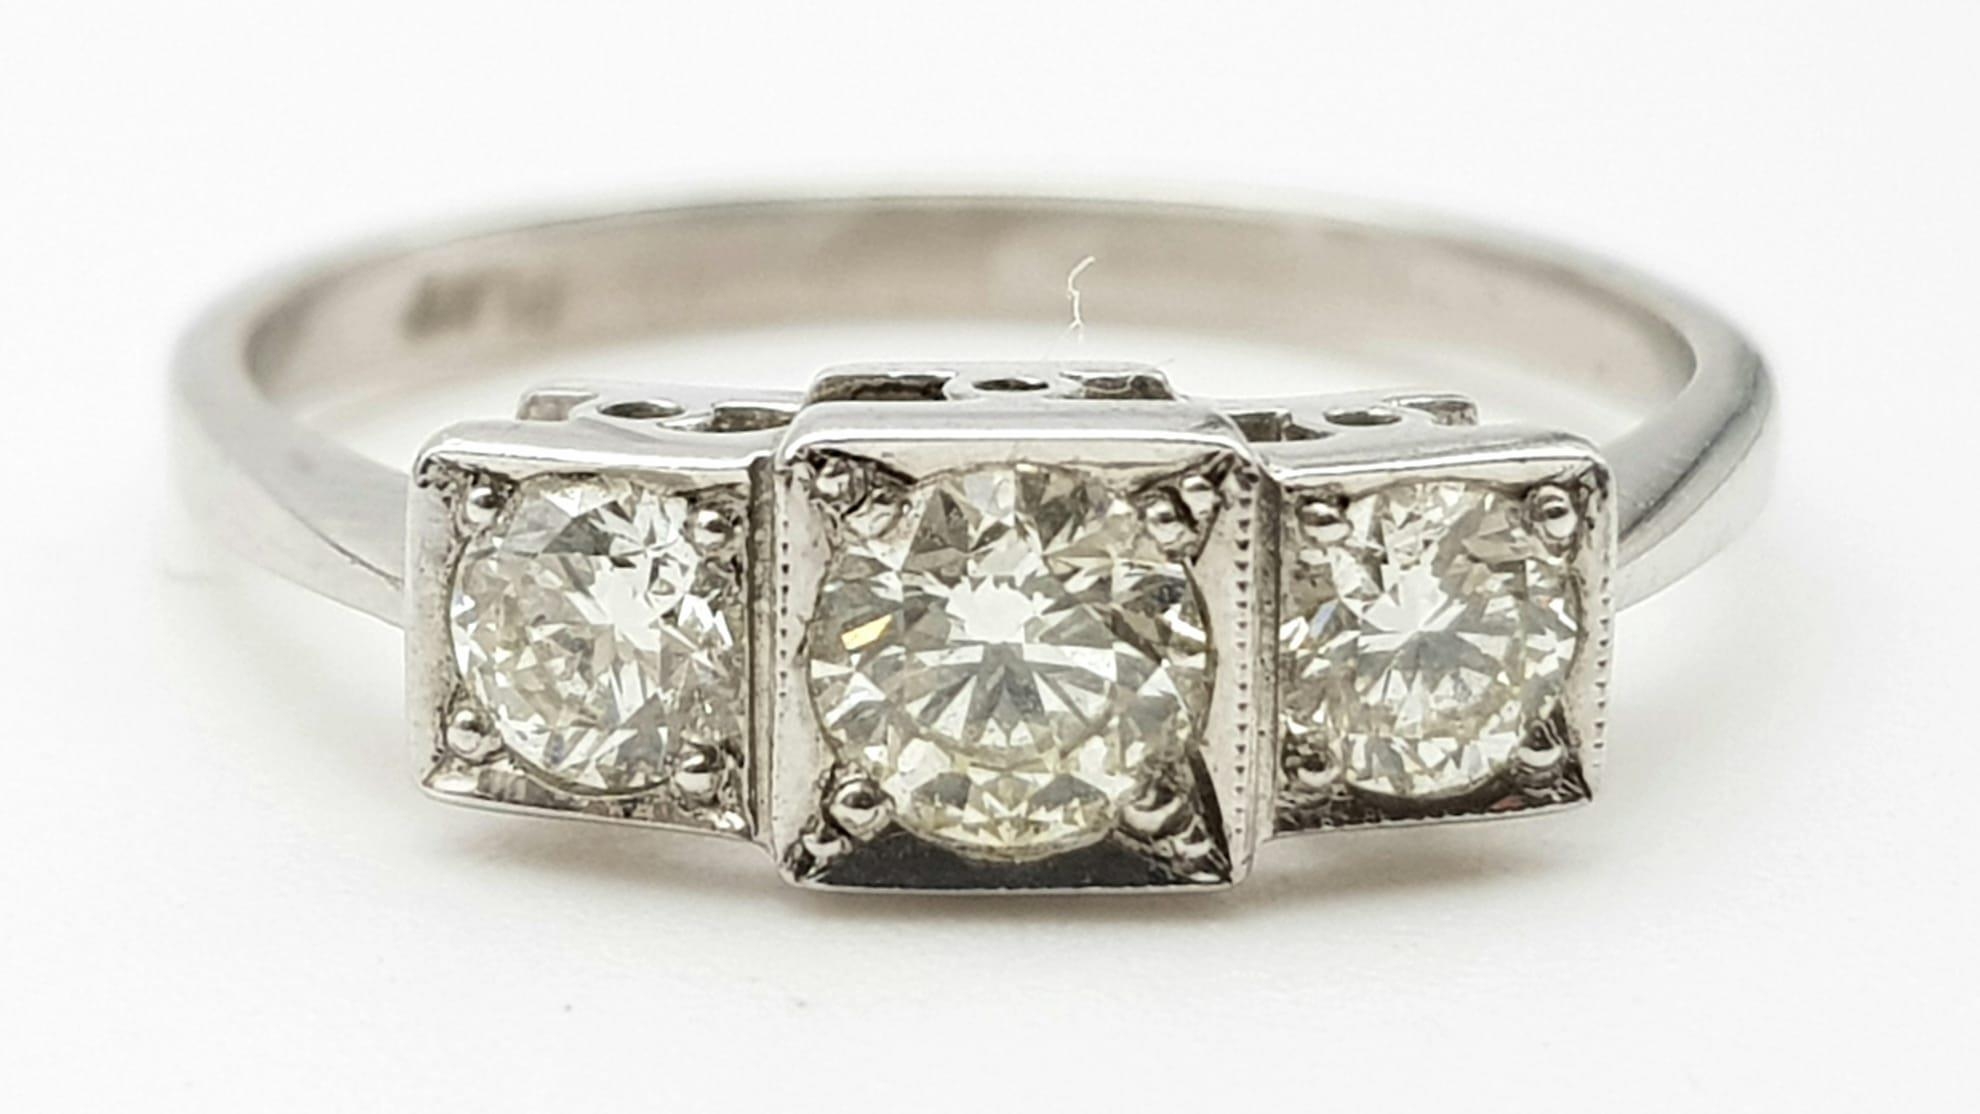 A 950 Platinum Victorian-Style Three Stone Diamond Ring. 0.75ct. Size O. 3.31g total weight. Comes